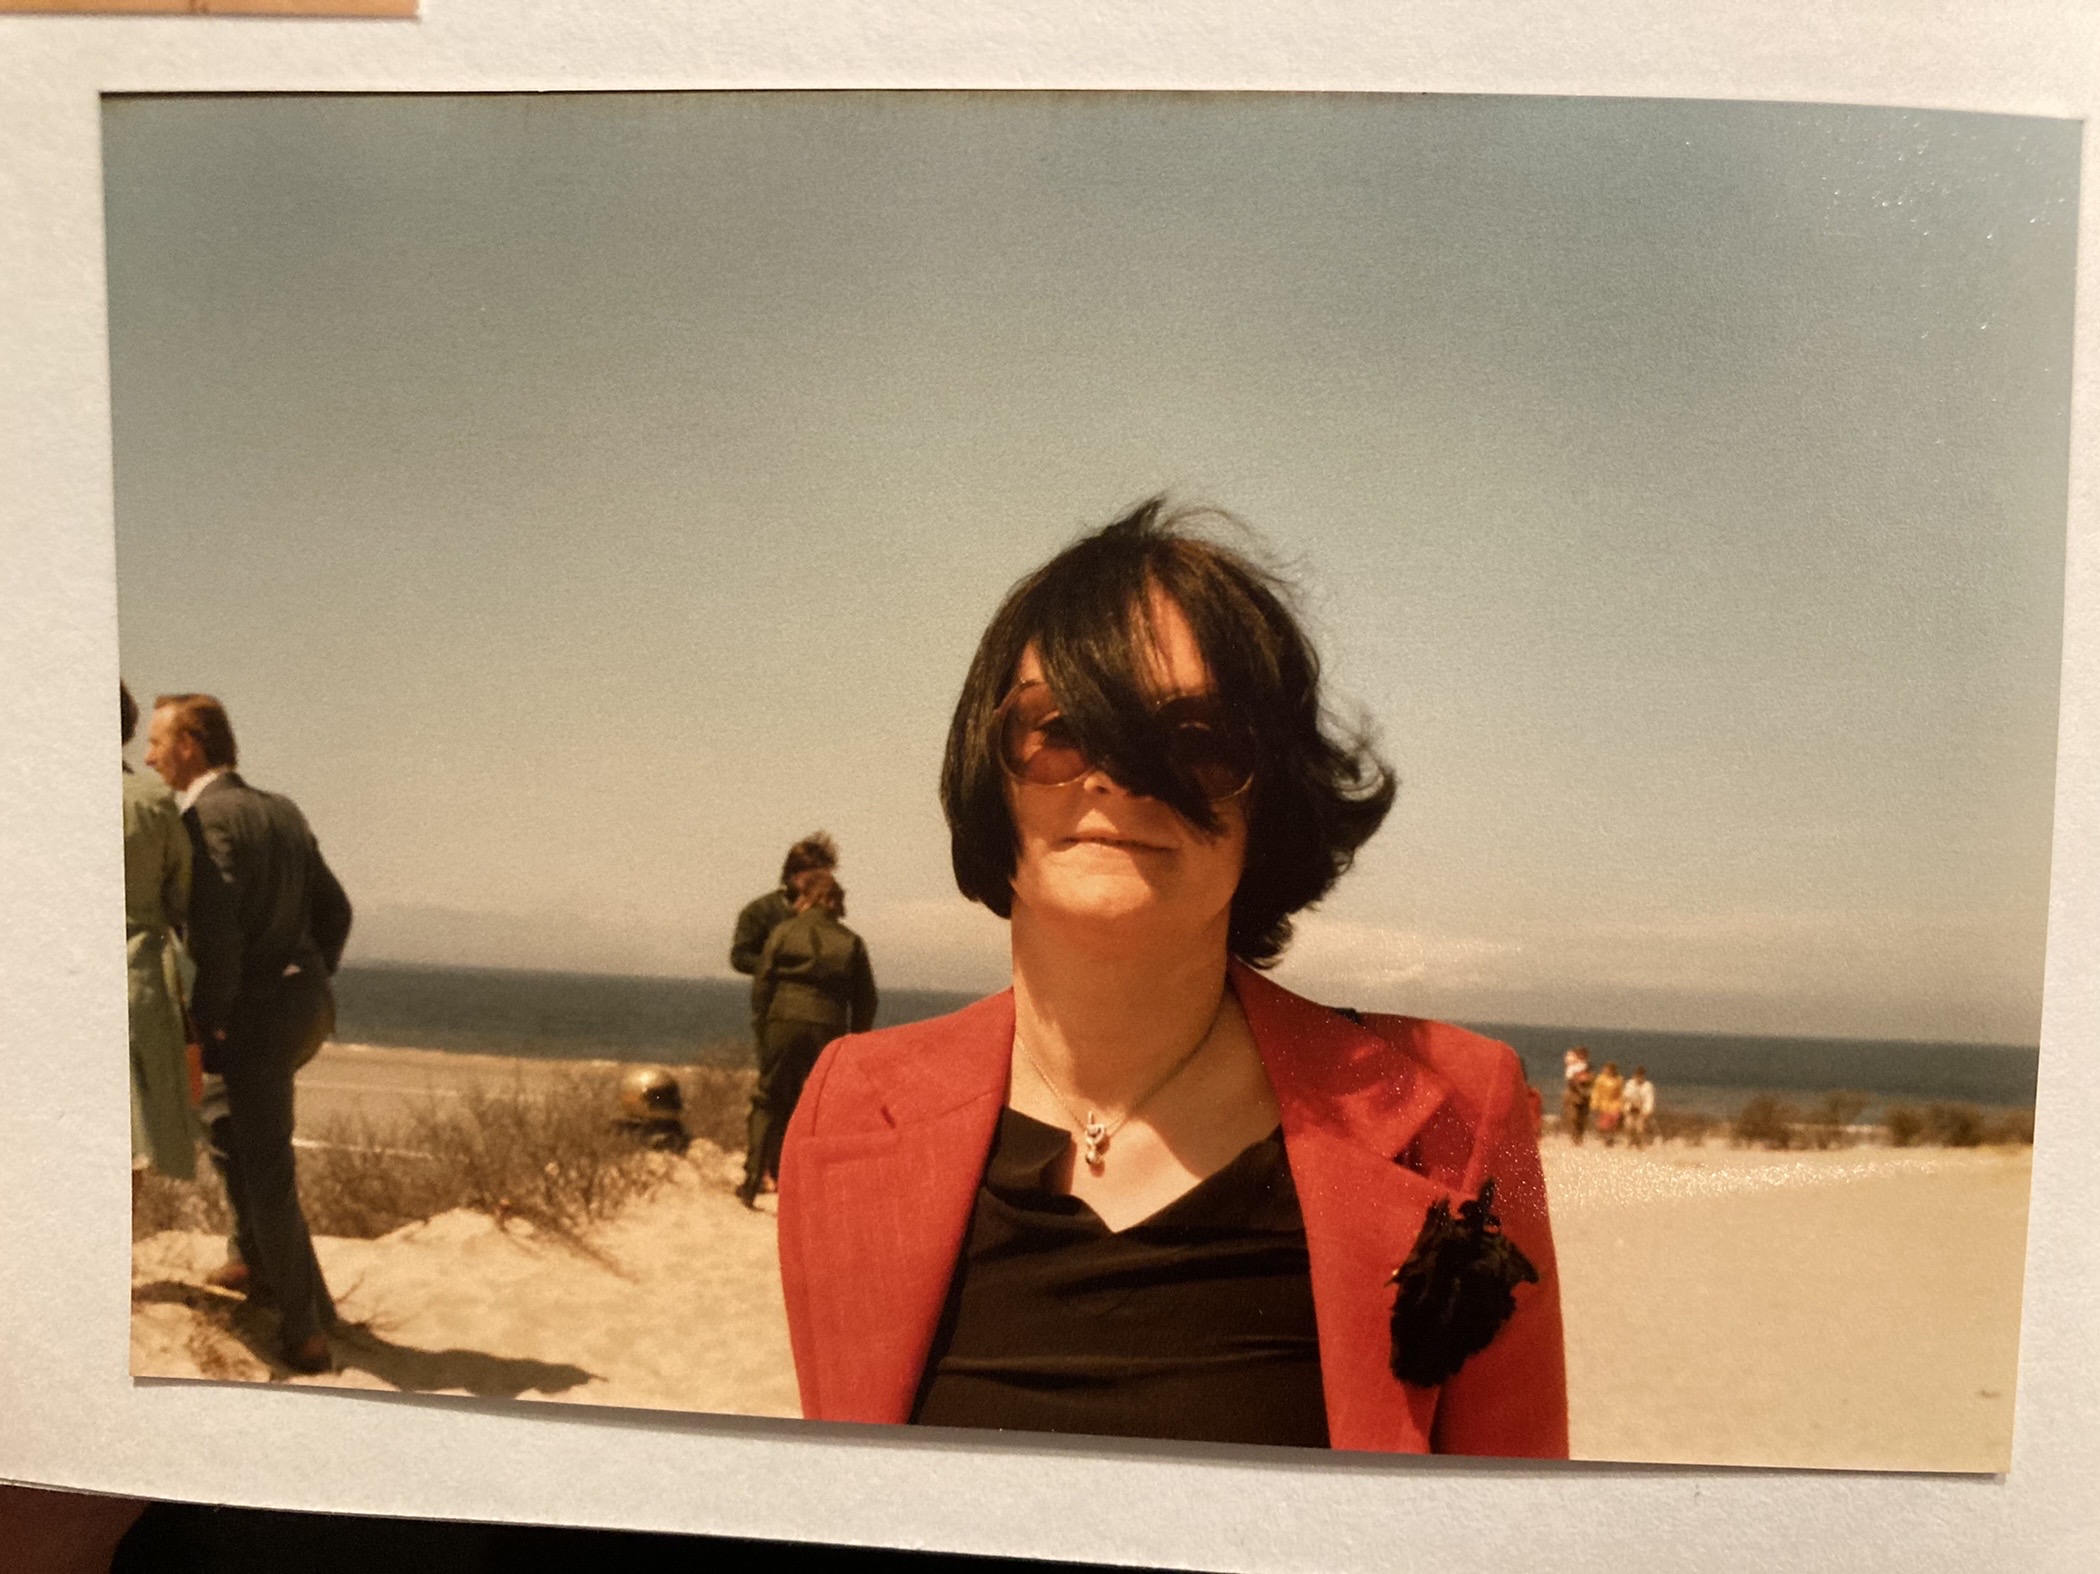 A photograph, lying on a pad, shows a woman with tinted glasses, a strand of hair covering part of her face; in the background, people, beach, sea